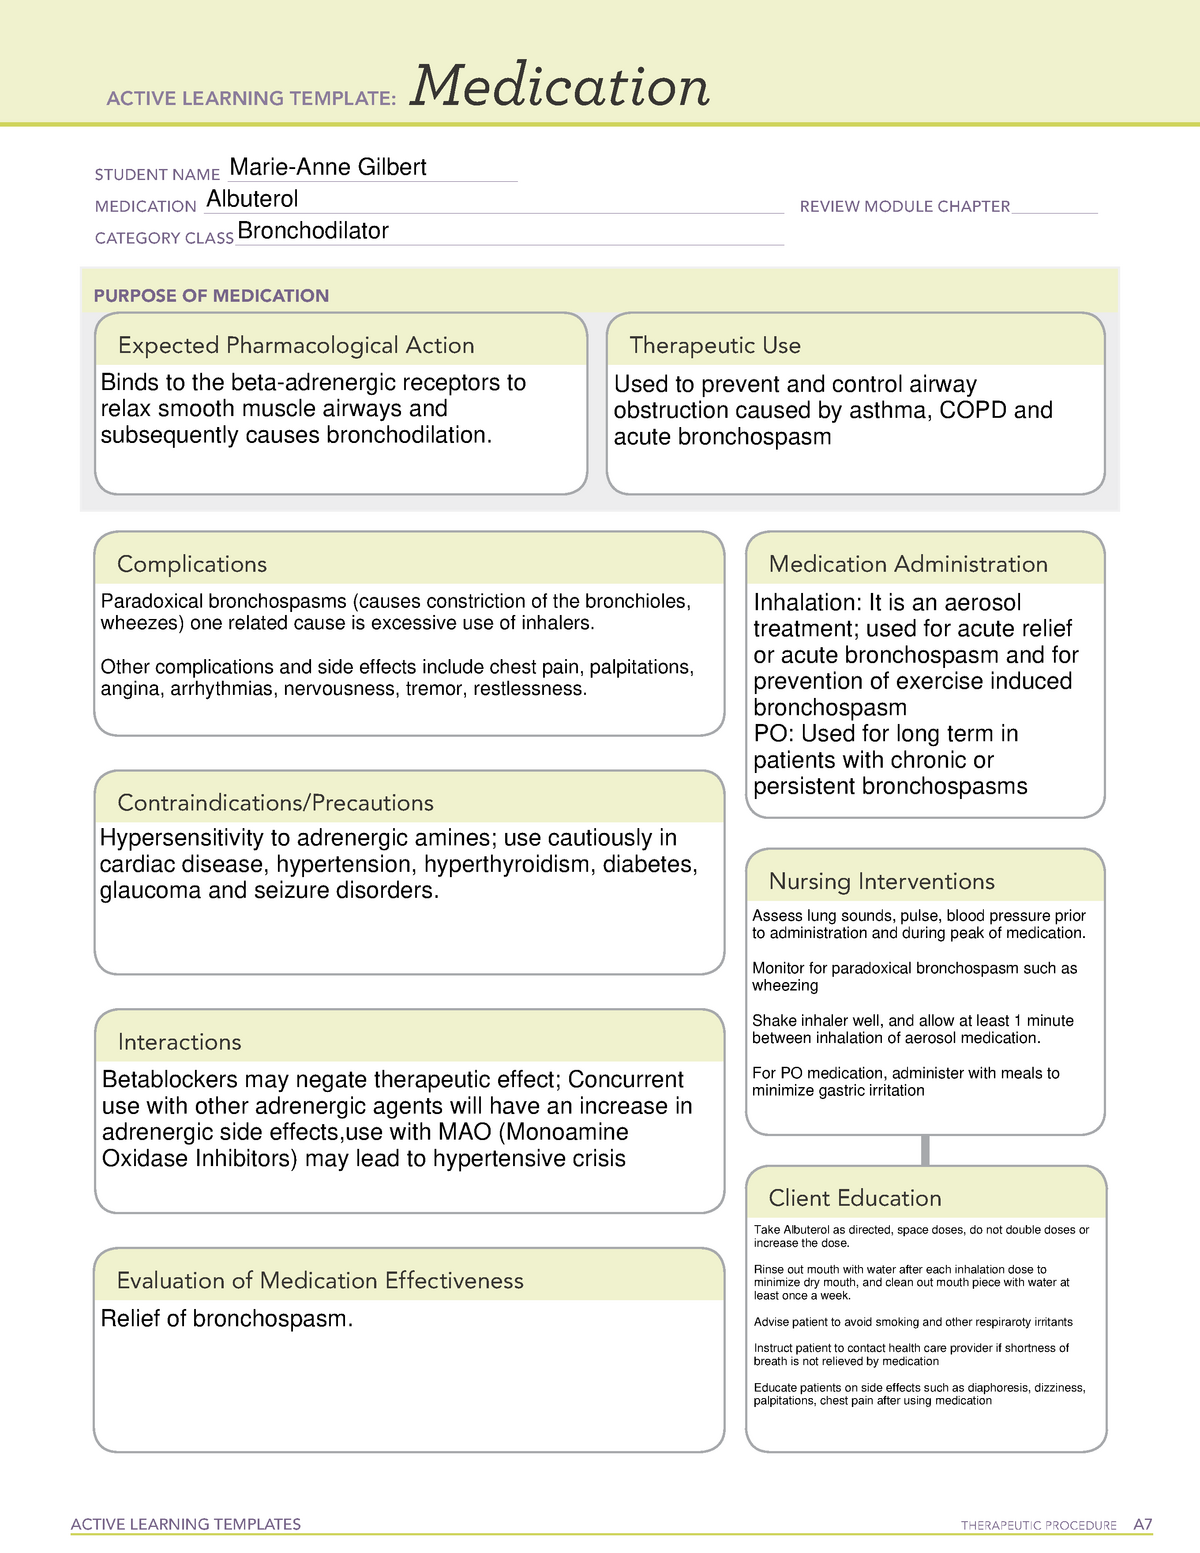 Albuterol Medication Template ACTIVE LEARNING TEMPLATES THERAPEUTIC